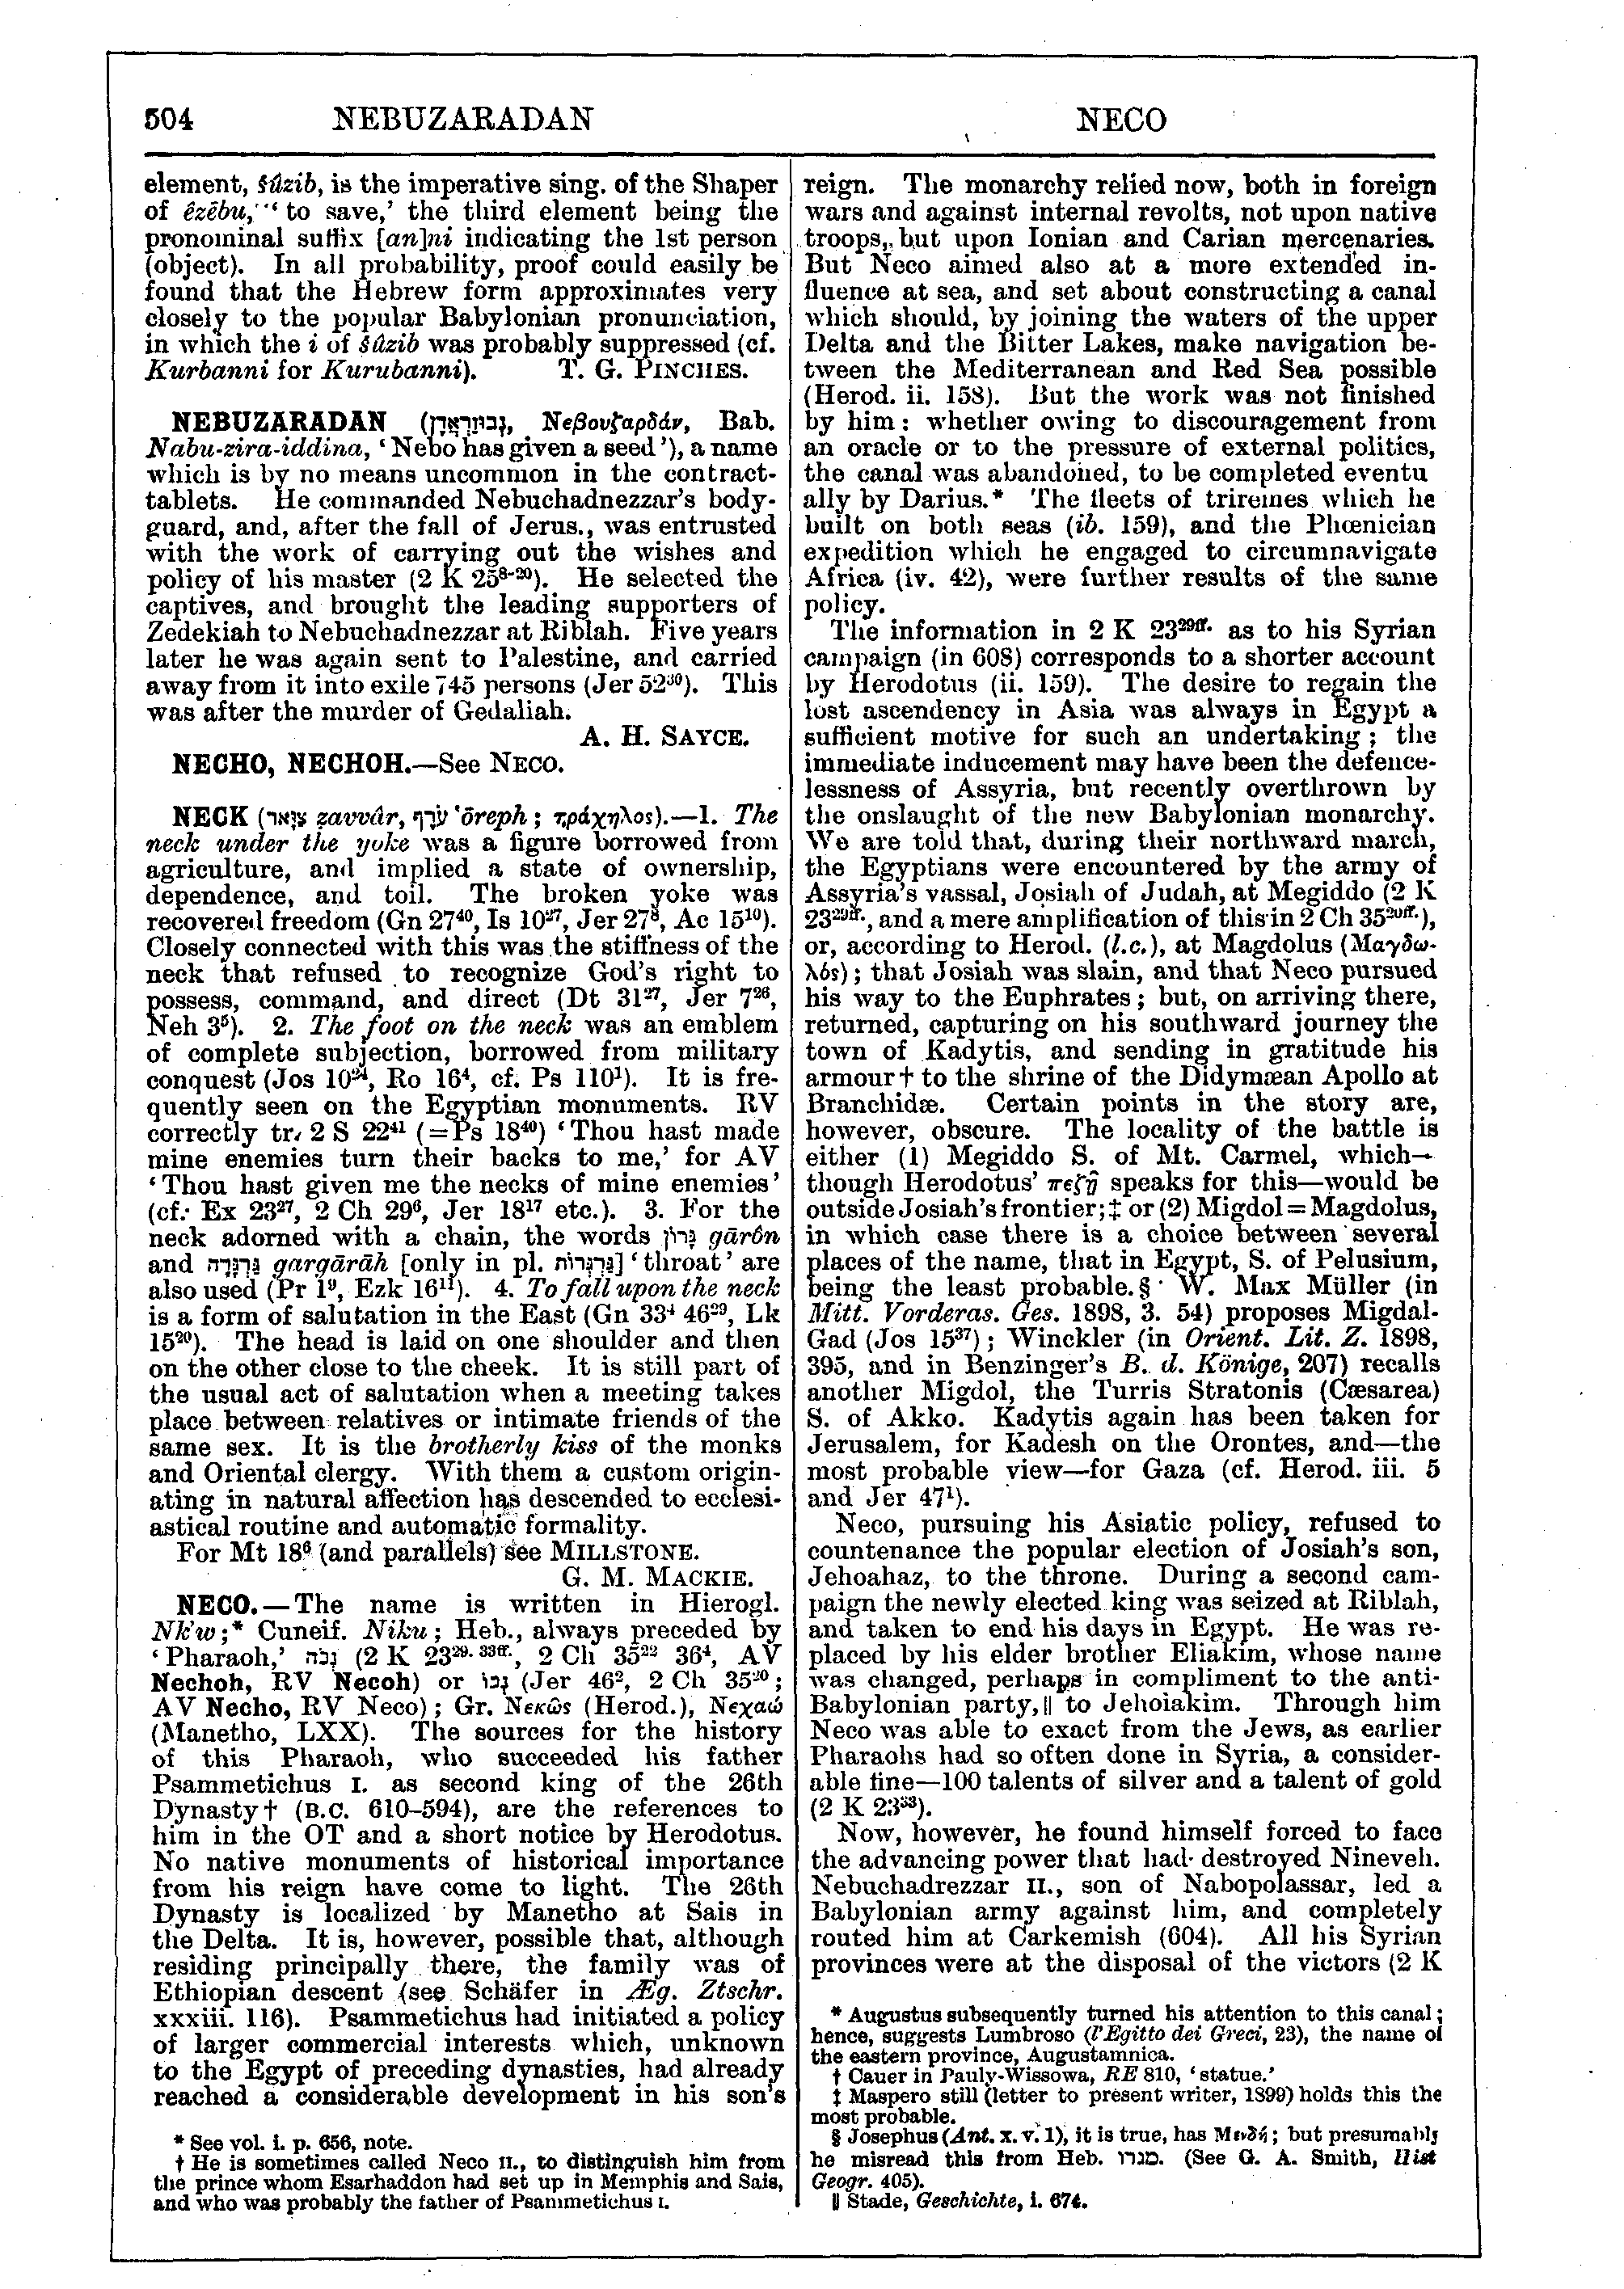 Image of page 504